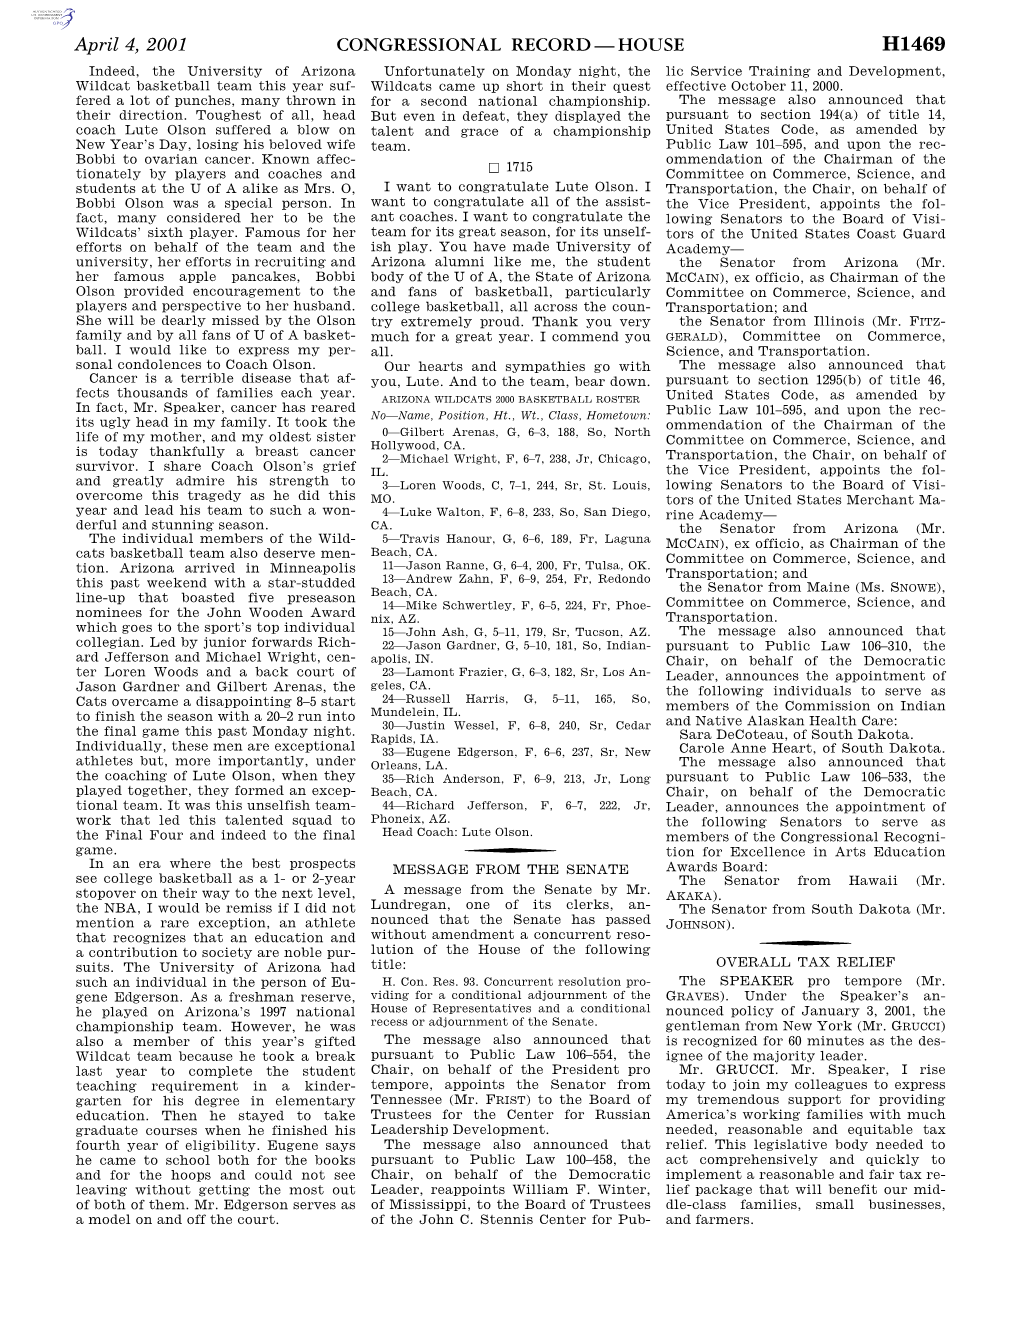 Congressional Record—House H1469